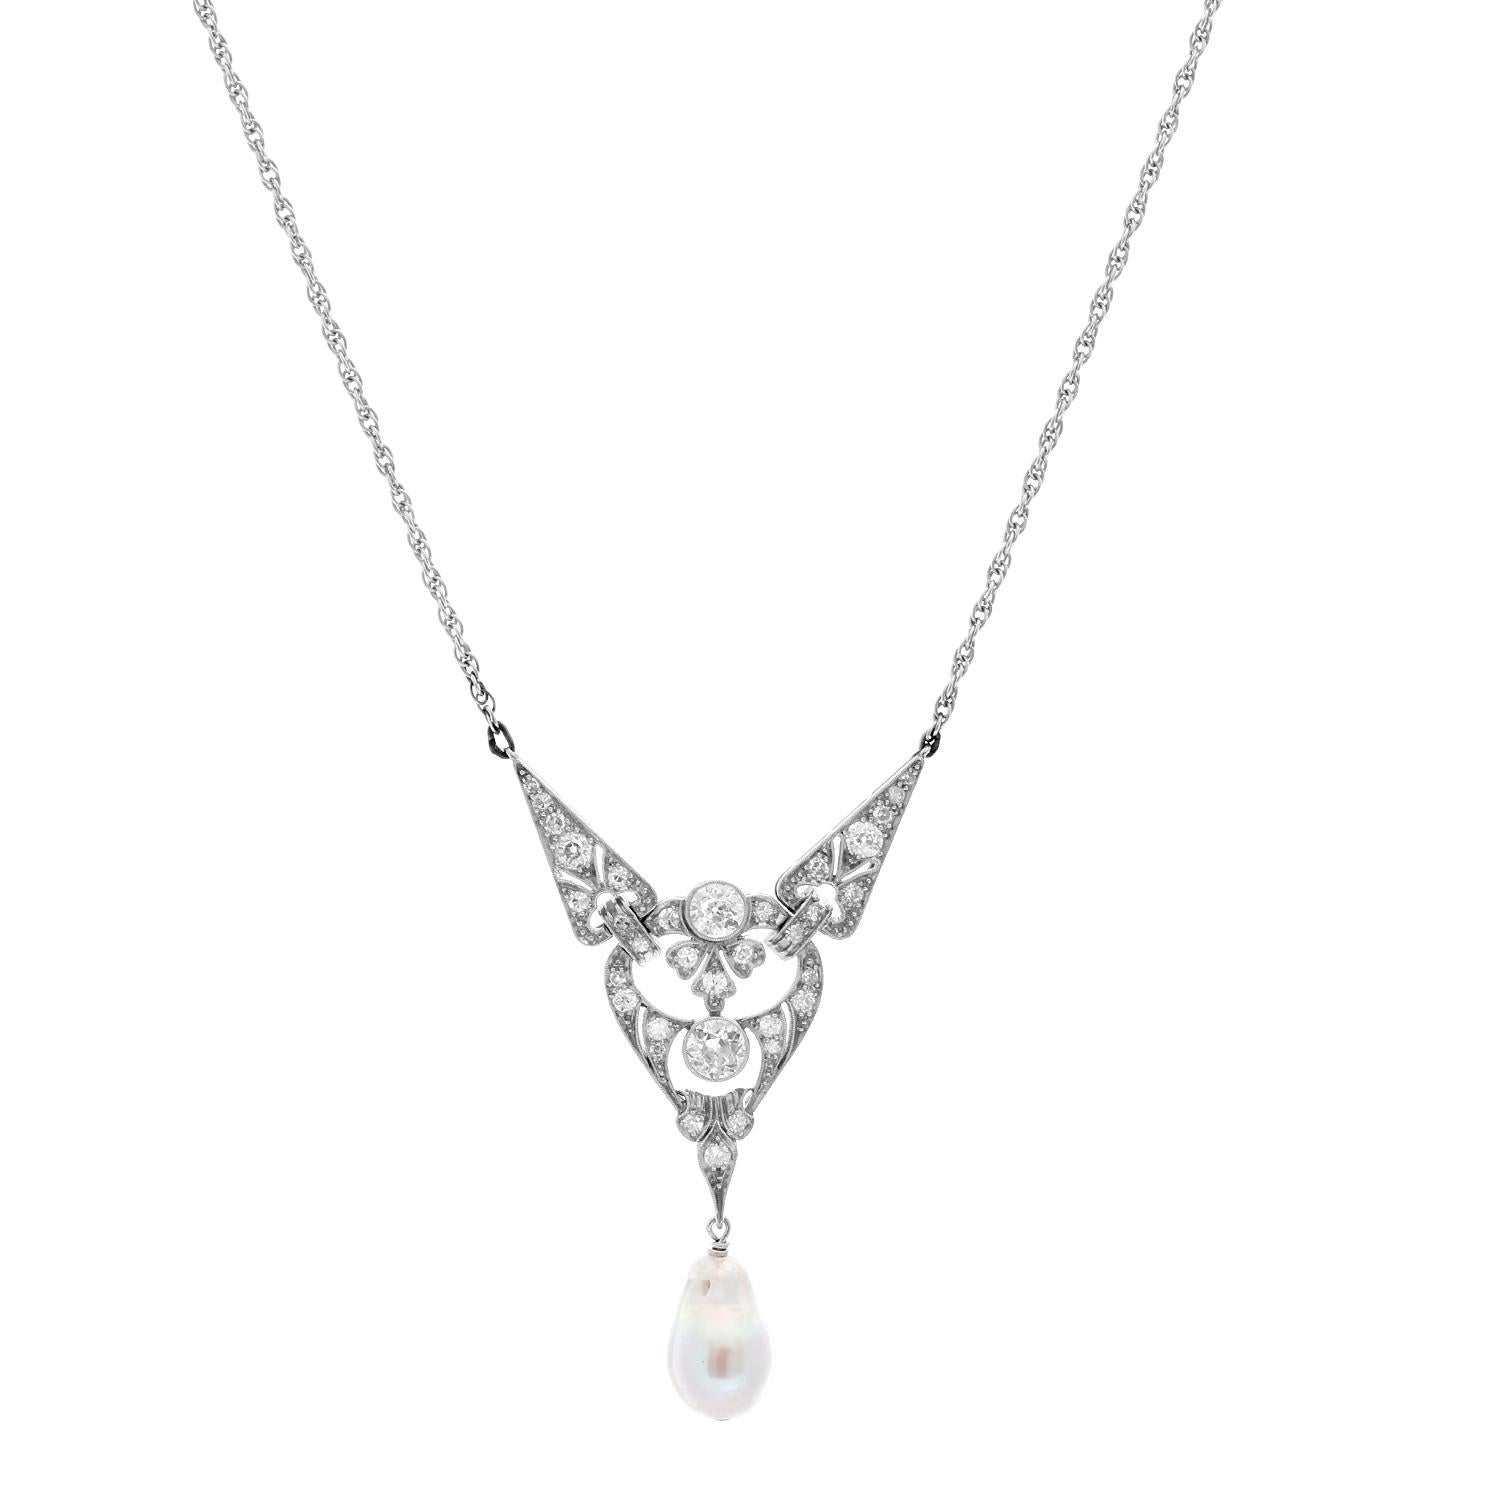 Platinum Garland Style Pendant On White Gold Chain - Beautiful Edwardian style pendant with brilliant cut diamonds at largest point measuring approx 5.1 mm and at smaller measuring 4.6mm.  Brilliant cut diamonds totaling approx 3 cts. Diamond color